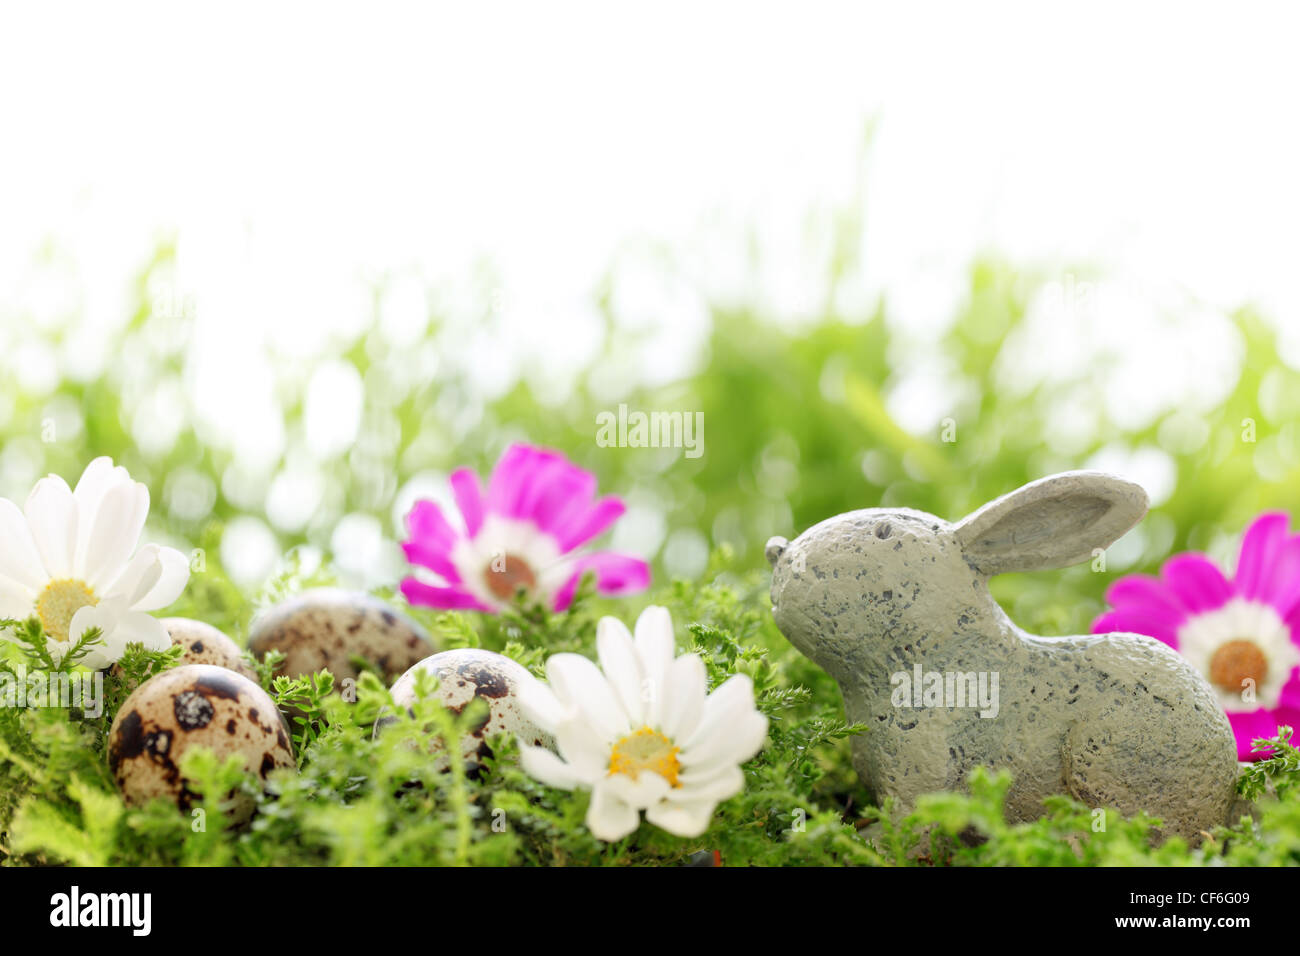 Rabbit figure,speckled easter eggs,colorful daisy on meadow. Stock Photo